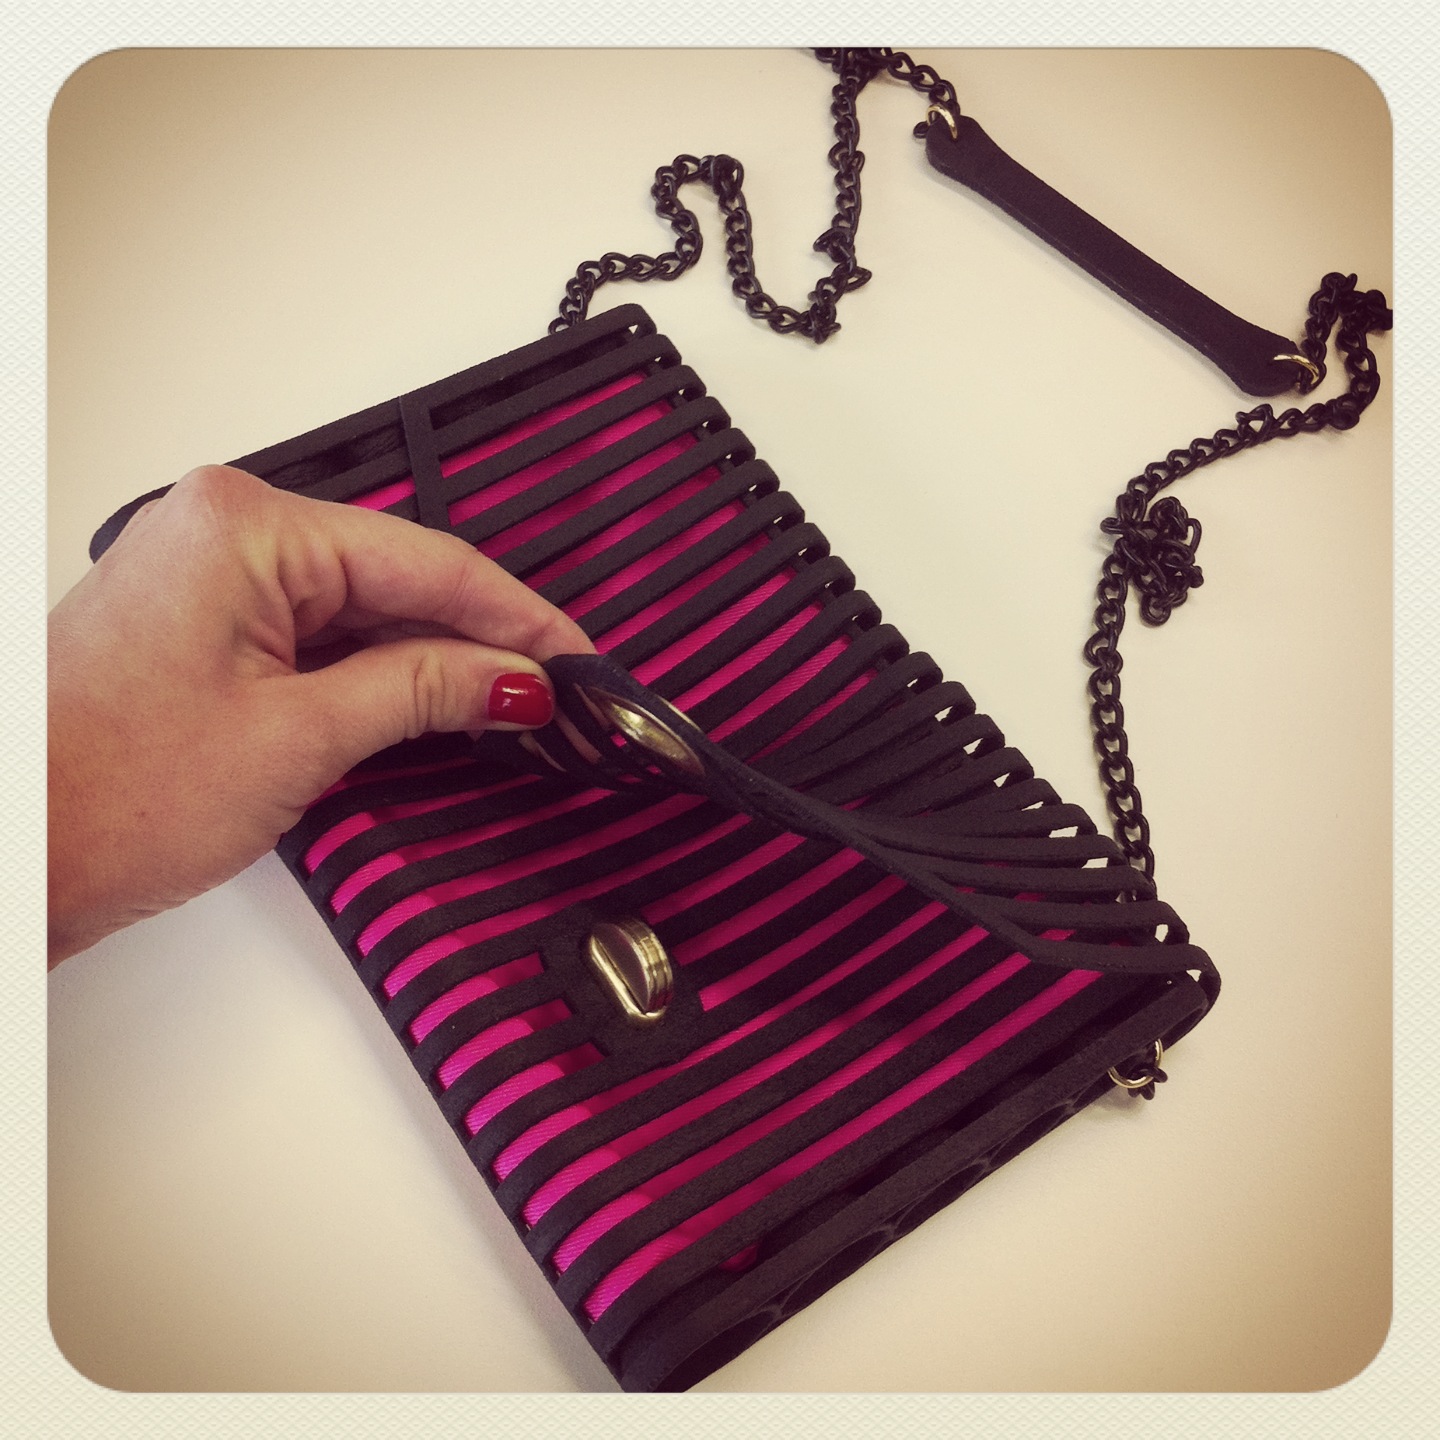 The first 3D printed flexible purse made by Pasquale Bonfilio